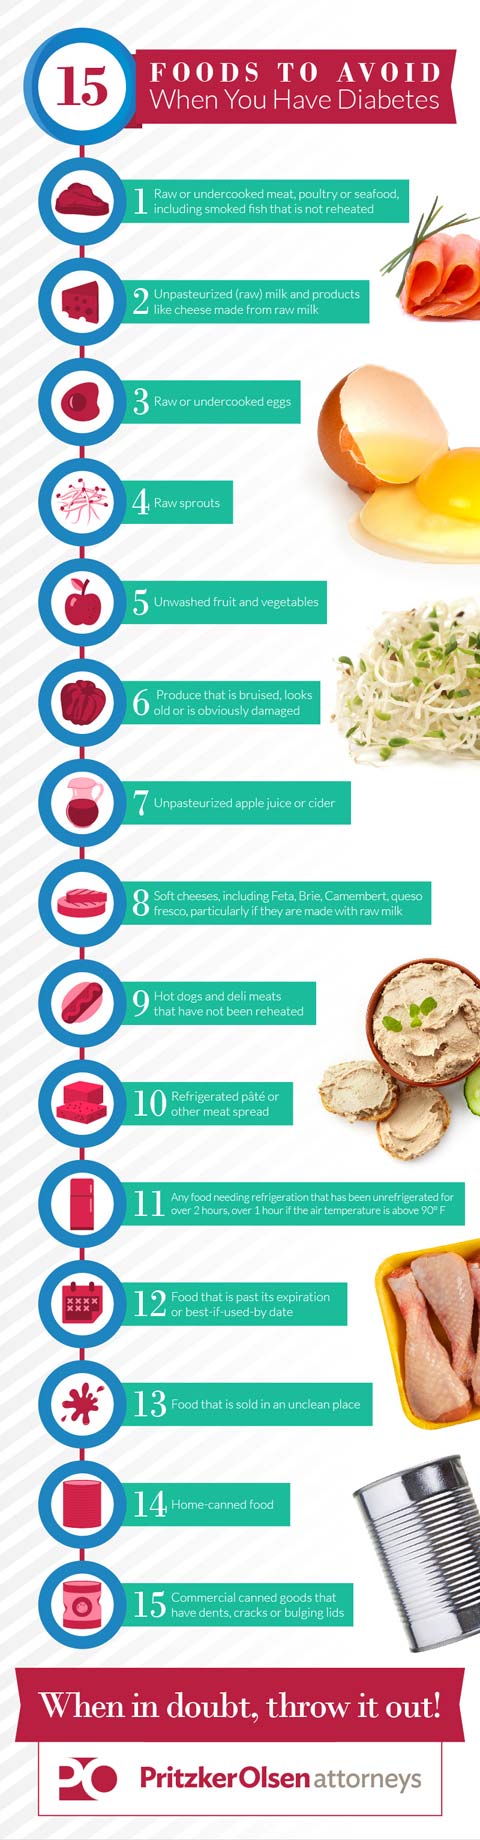 diabetes-food-safety-infographic